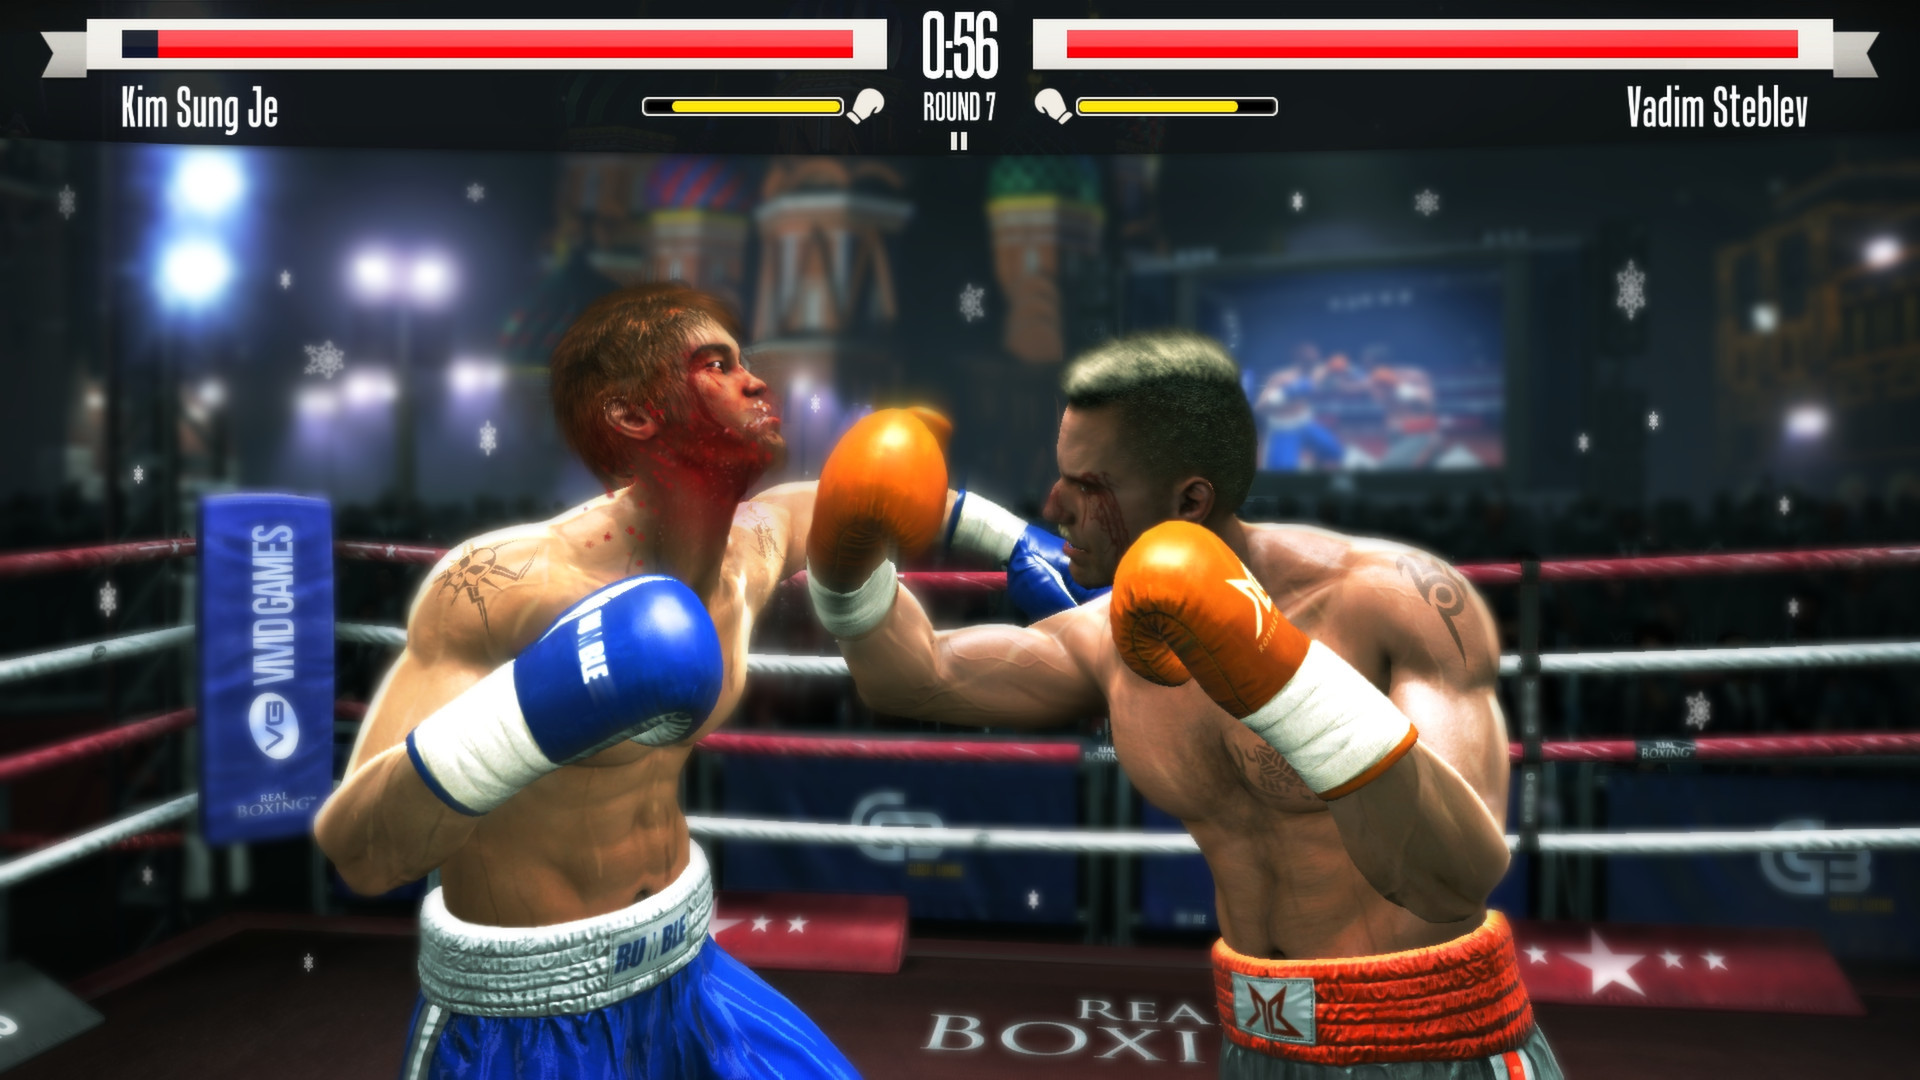 real boxing games free download